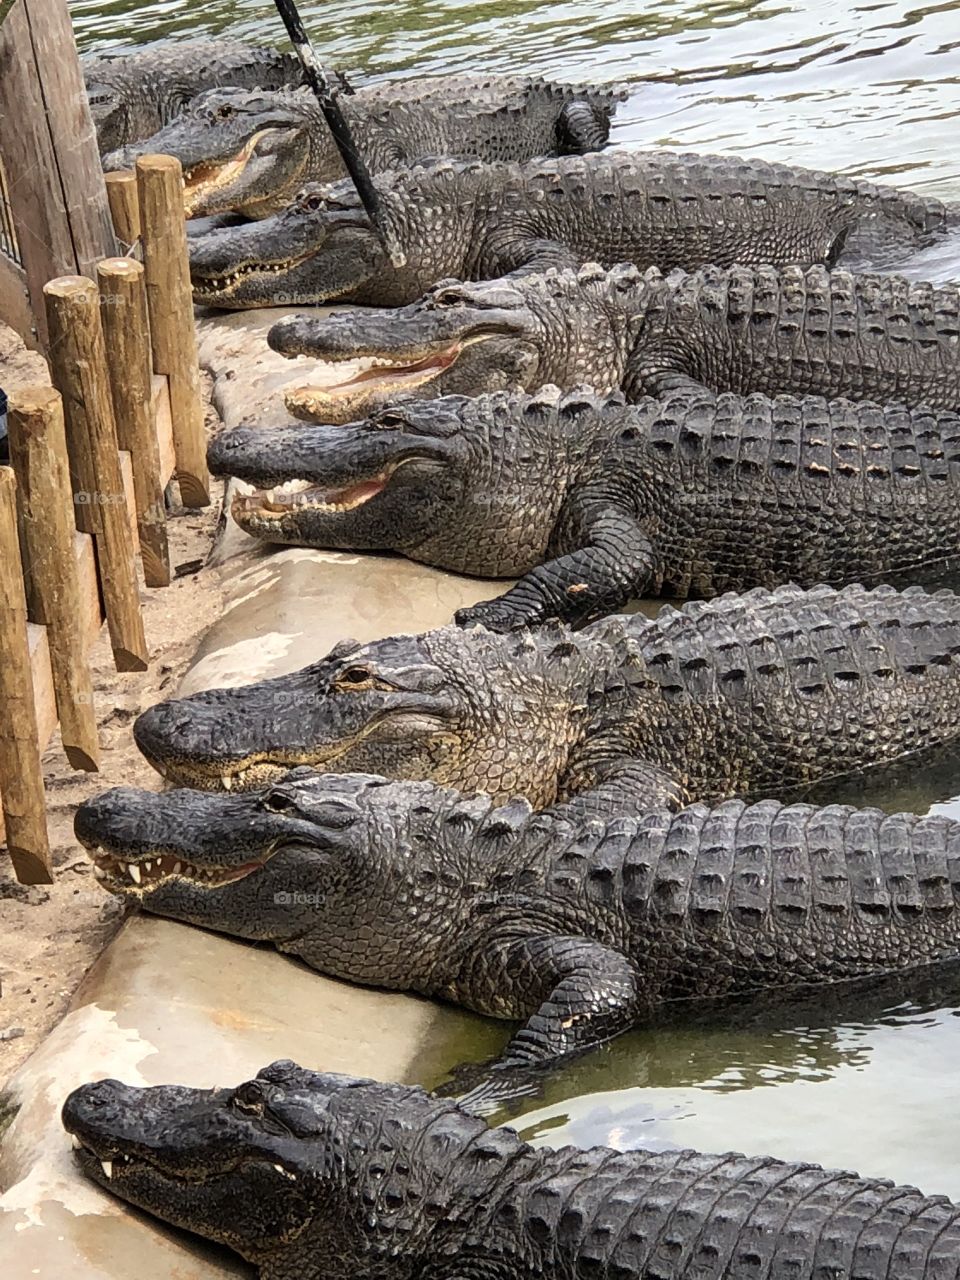 Several alligators together in the water